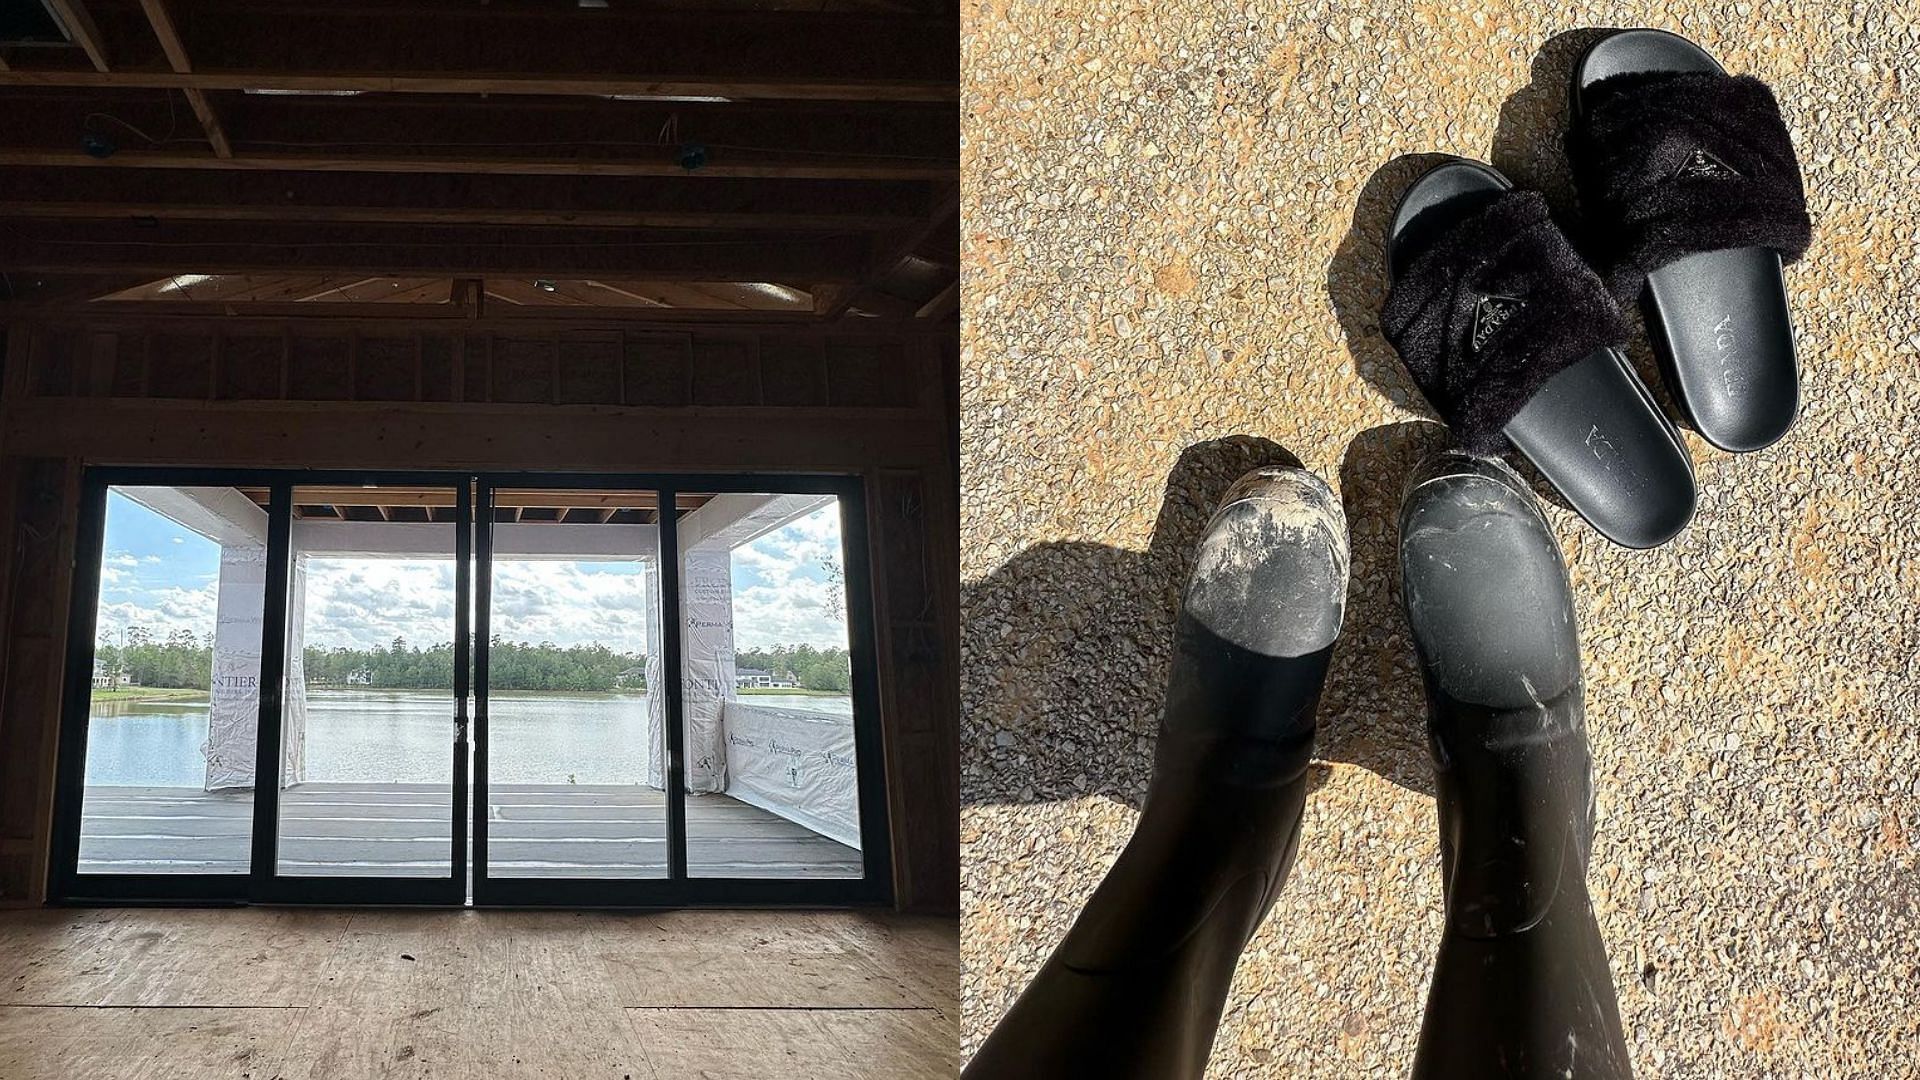 Simone Biles shares a glimpse of her future home with husband Jonathan Owens. (Image credit: Simone Biles on Instagram)